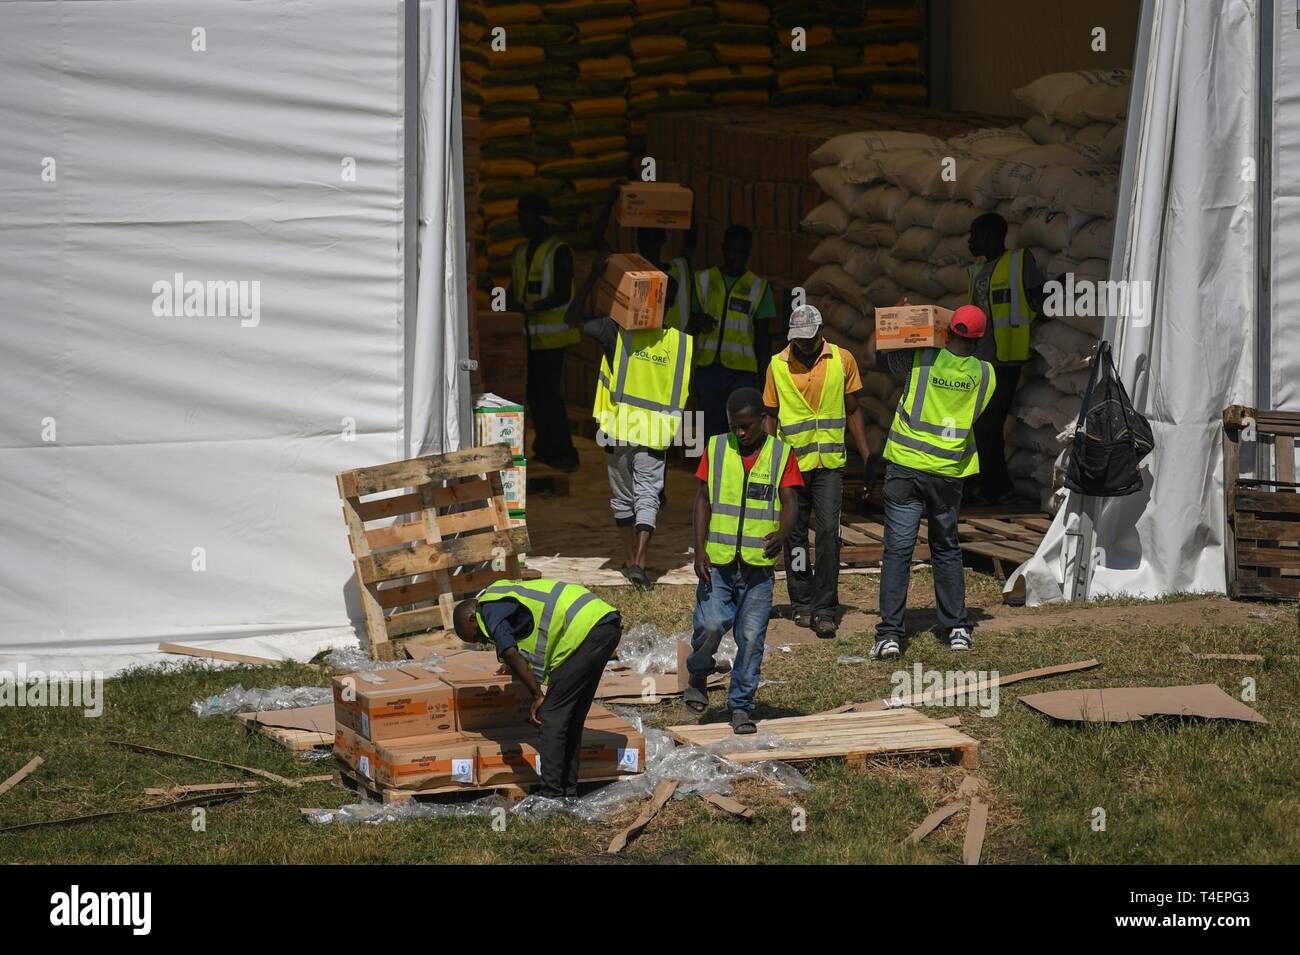 The World Food Programme, the food-assistance branch of the United Nations, stages relief supplies at Beira Airport, Mozambique, April 2, 2019, during humanitarian relief efforts in the Republic of Mozambique and surrounding areas following Cyclone Idai. Teams from Combined Joint Task Force-Horn of Africa, which is leading U.S. Department of Defense support to relief efforts in Mozambique, began immediate preparation to respond following a call for assistance from the U.S. Agency for International Development’s Disaster Assistance Response Team. Stock Photo